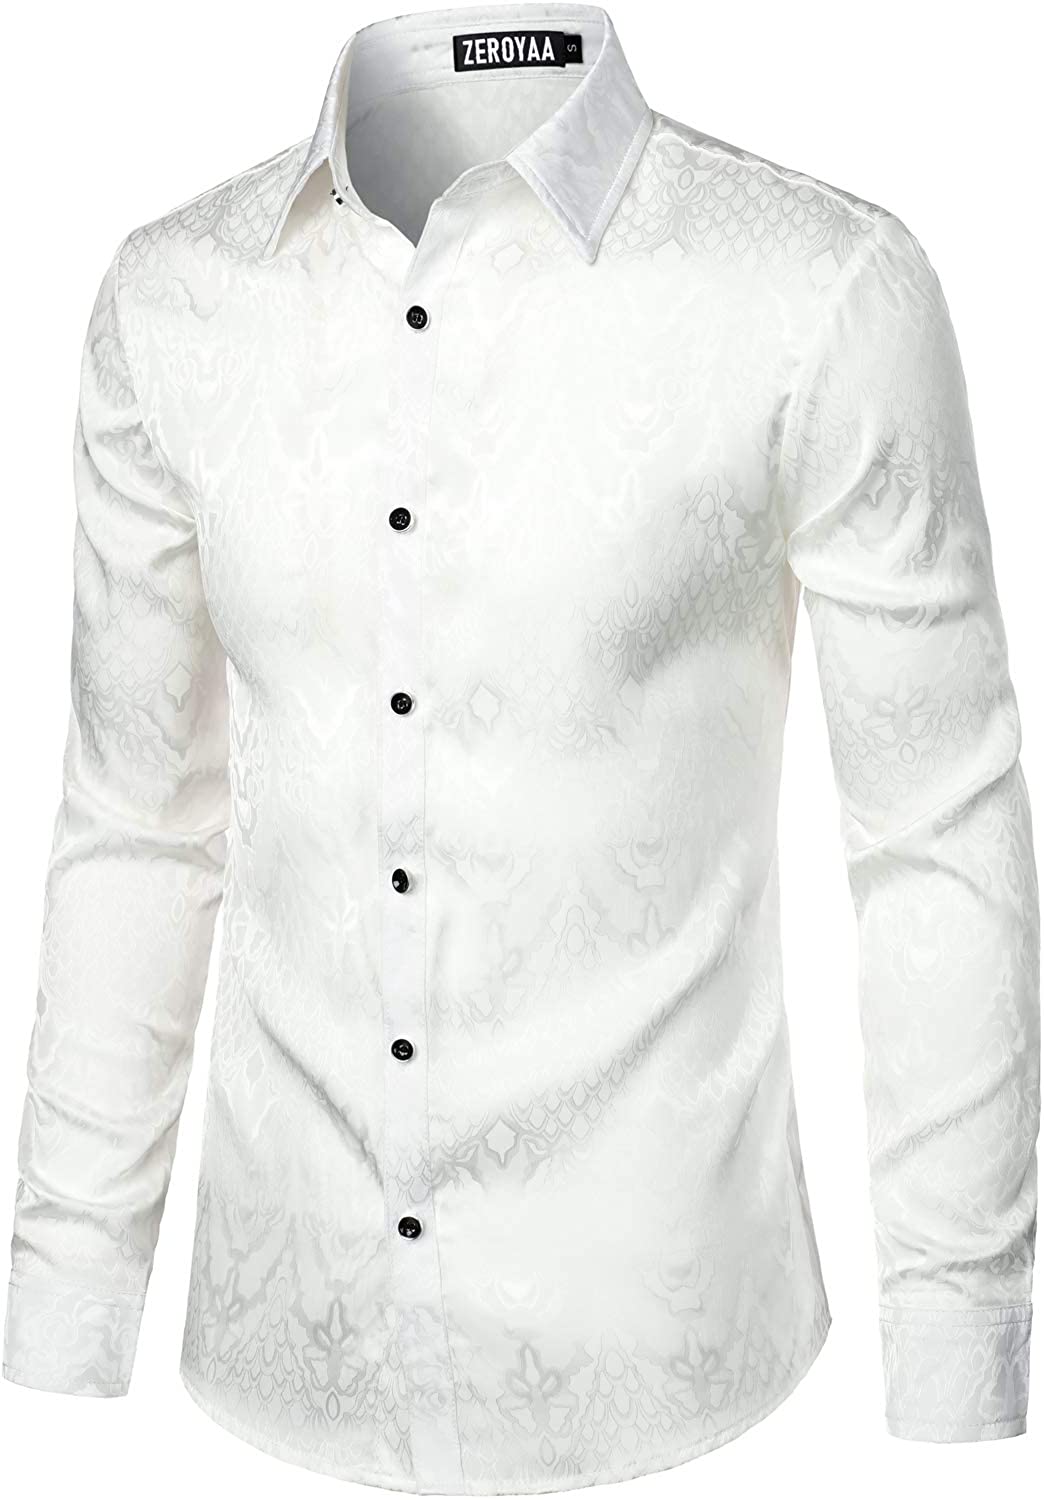 Men's Ivory White Long Sleeve Button Up Shirt